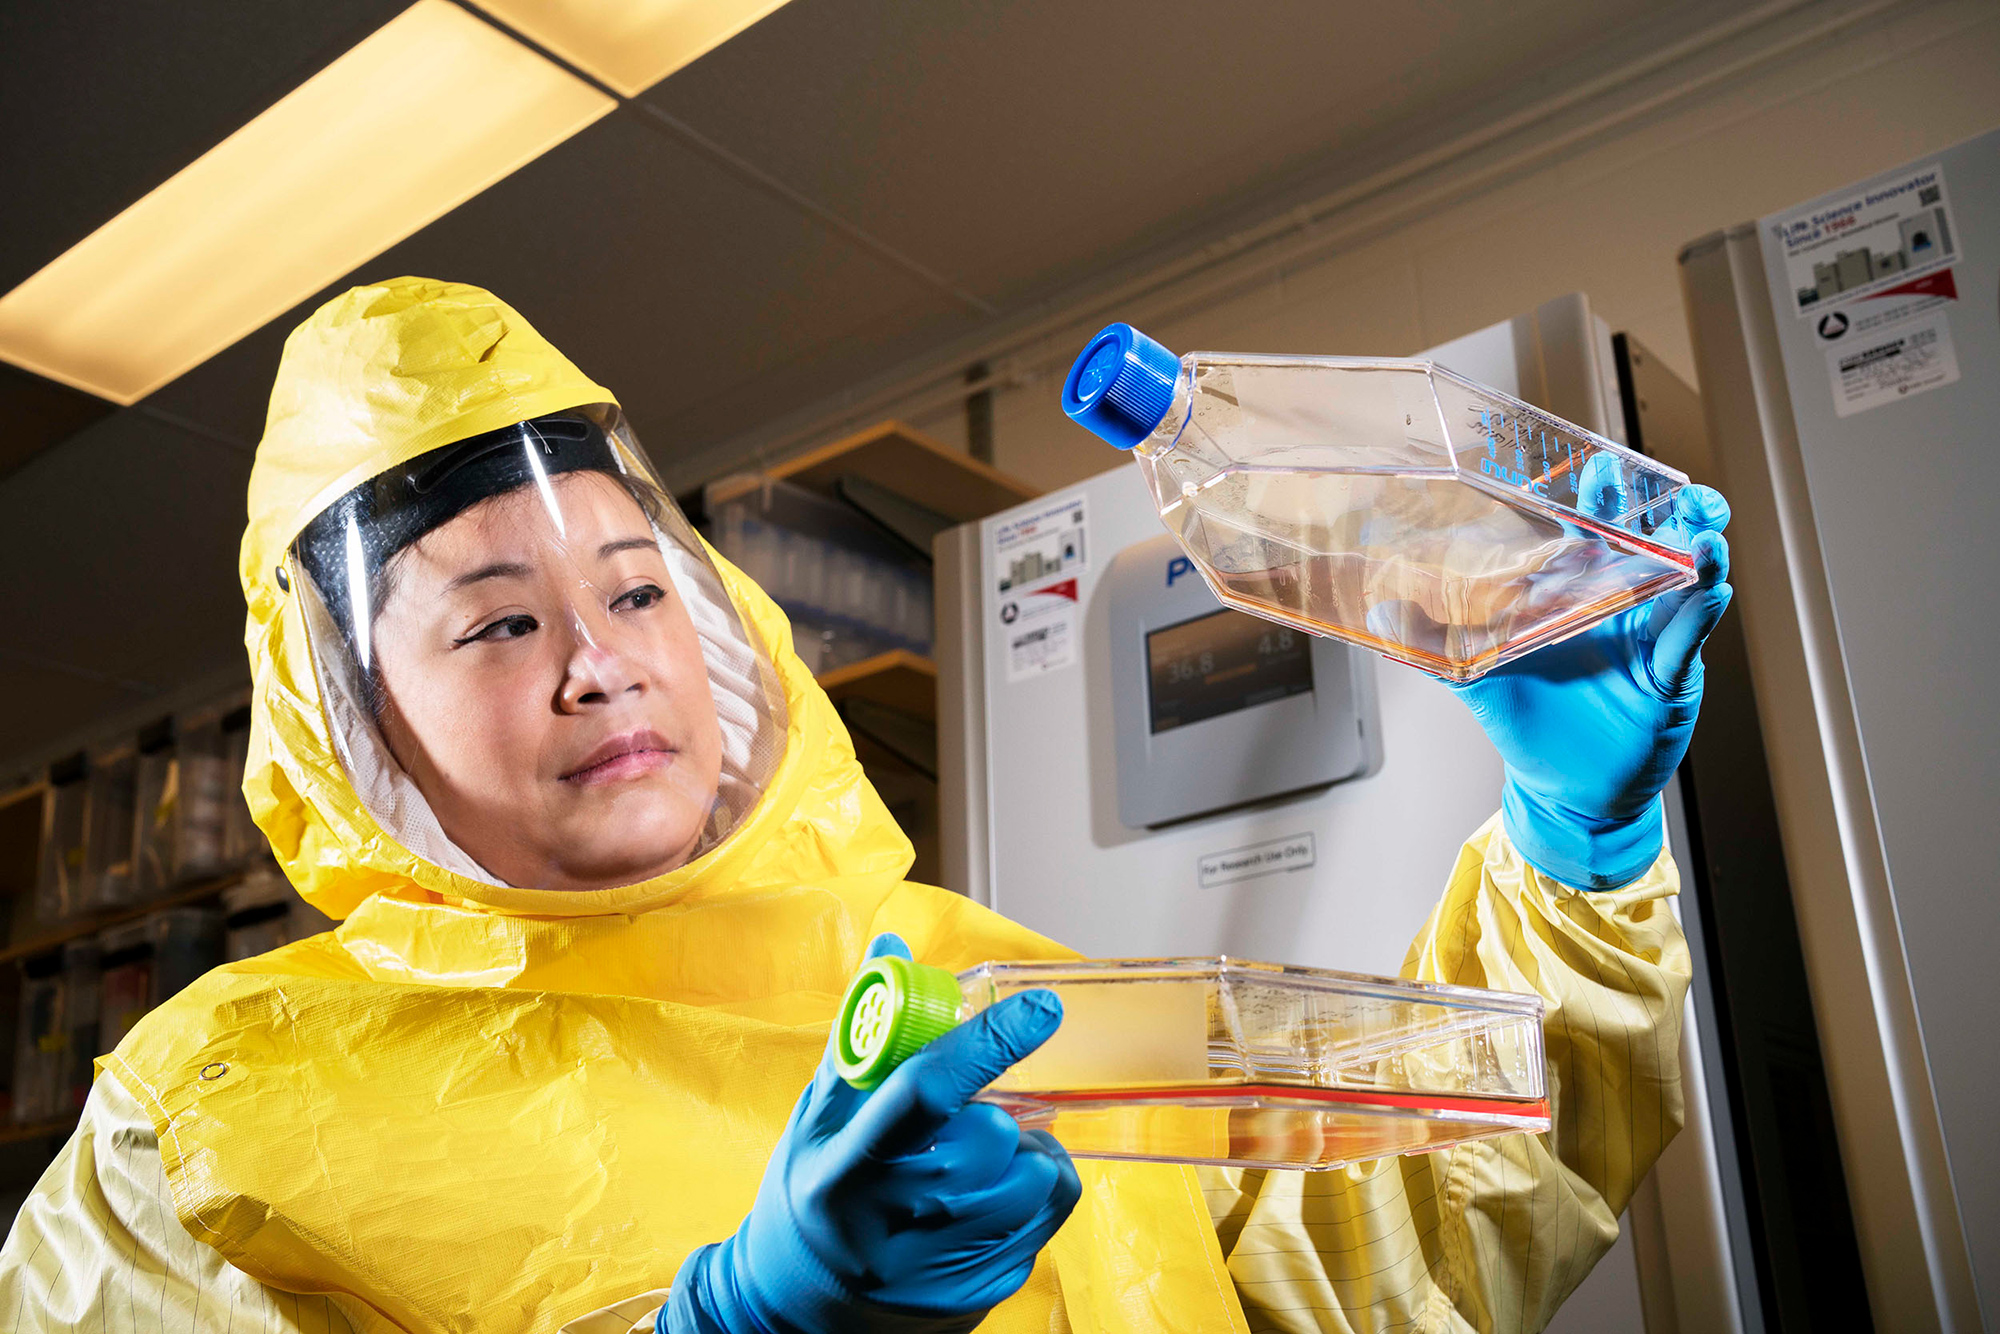 Jessica Lam wearing a yellow hazmat suit, holding up and examining two flasks containing different coloured liquids